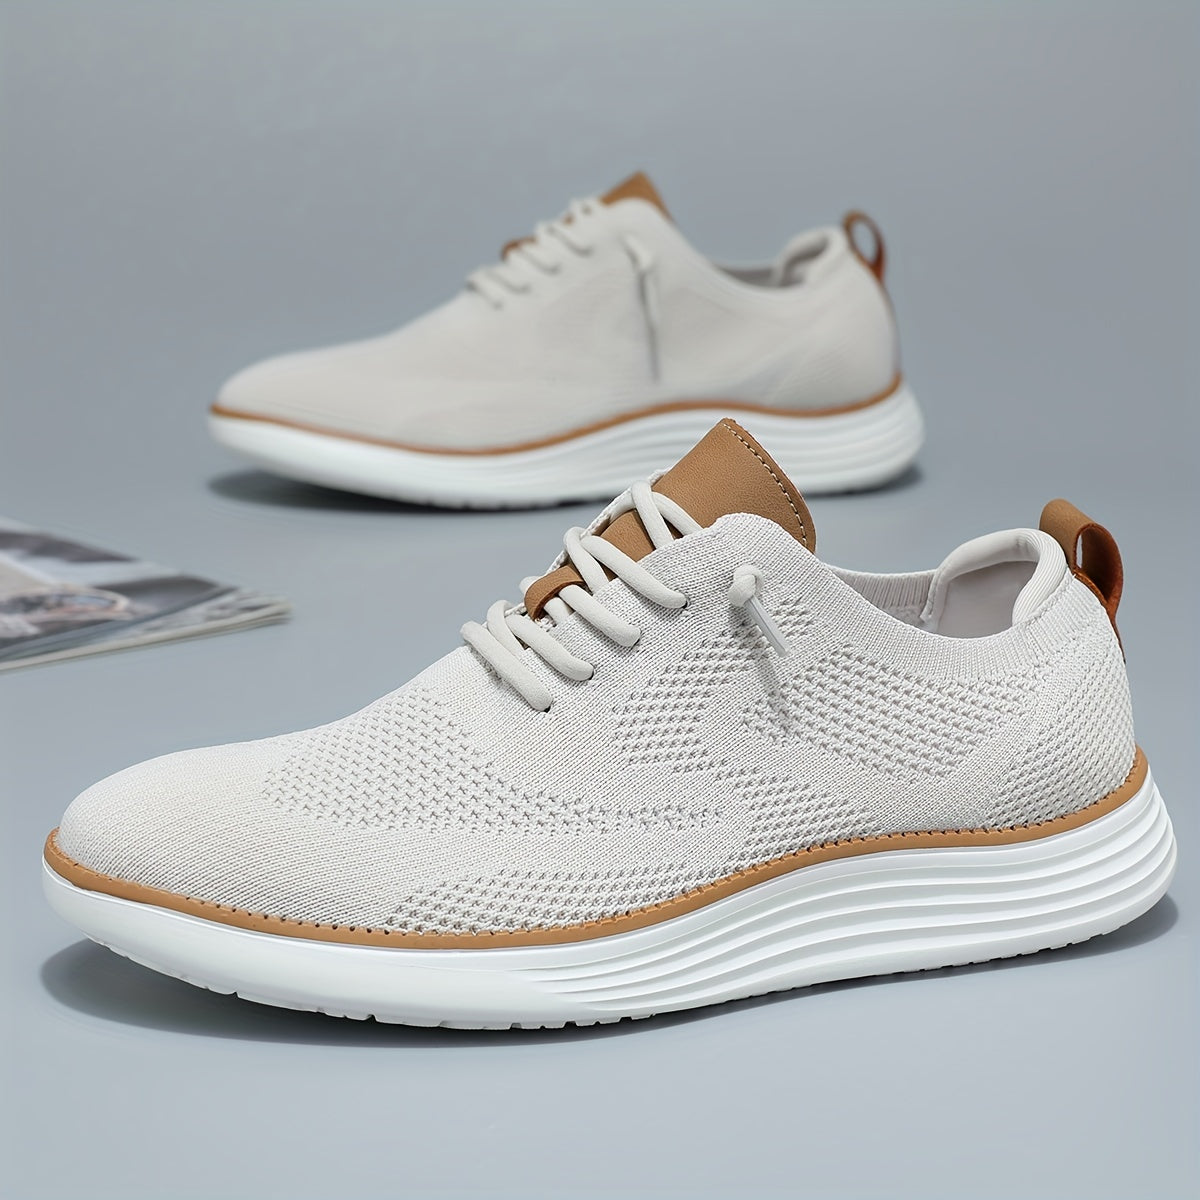 Men's Lightweight Athletic Sneakers, Breathable